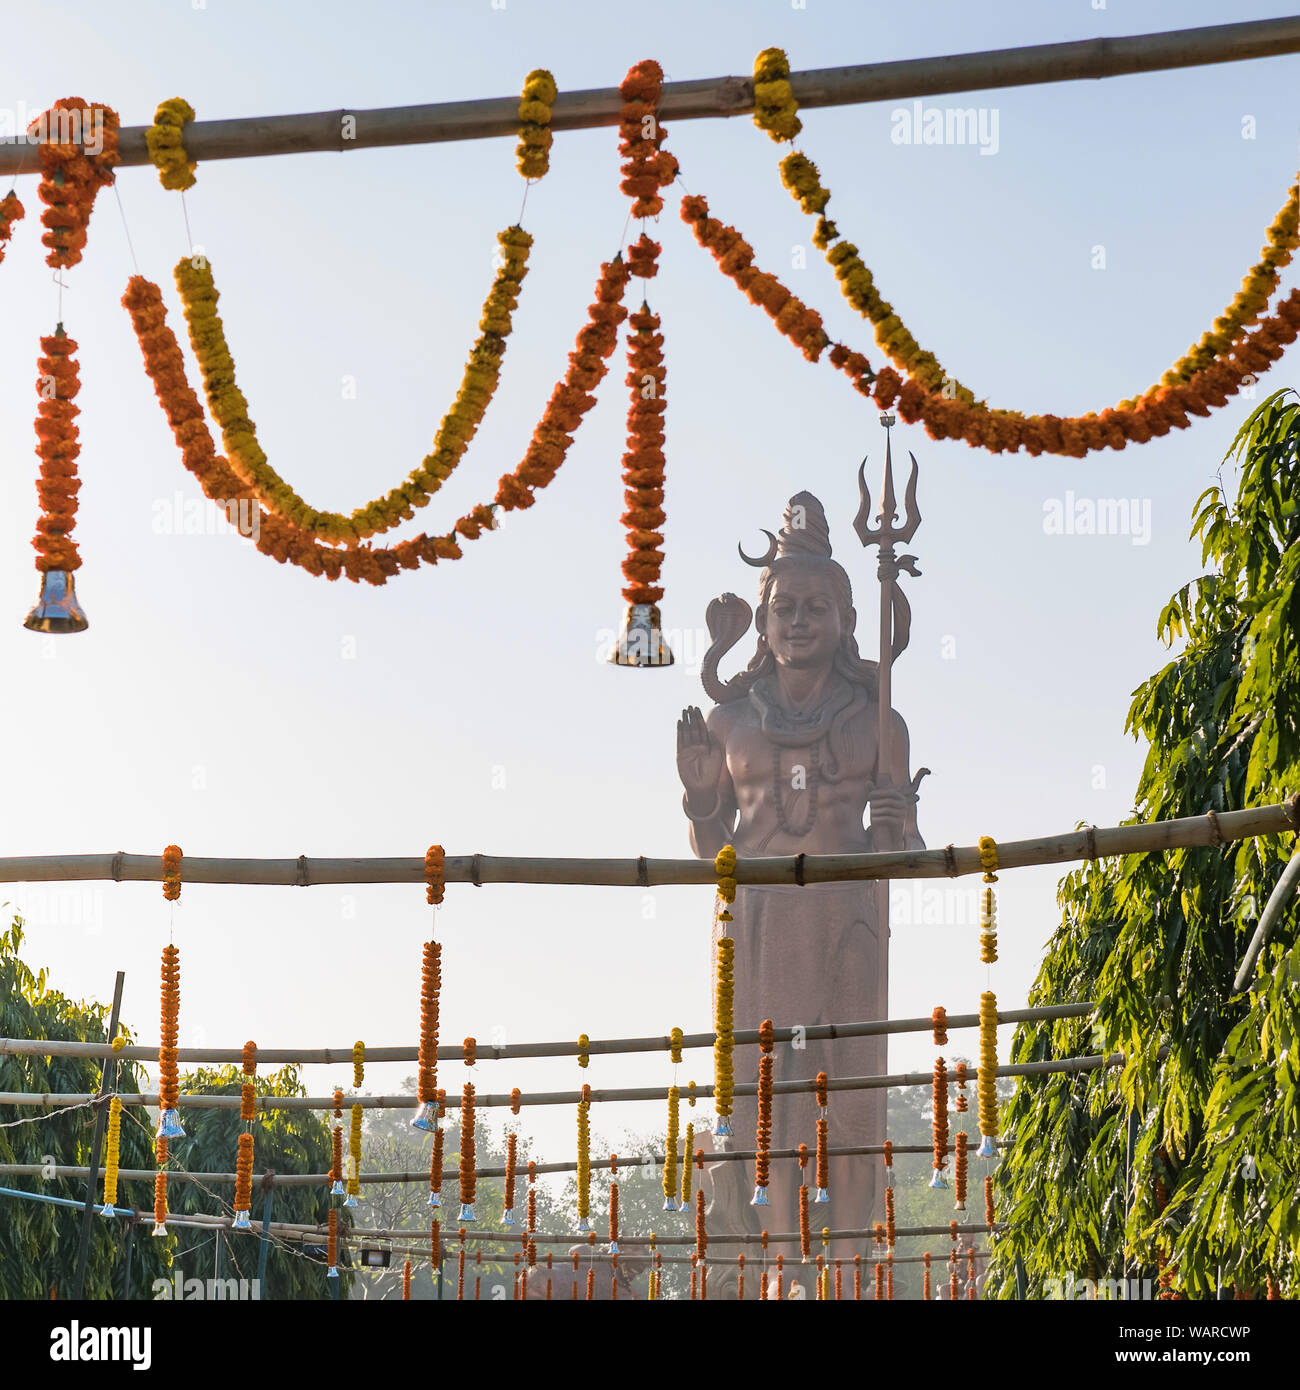 Statue of lord Shiva wrapped in a snake, holding a trident, outside of New Delhi, India Stock Photo